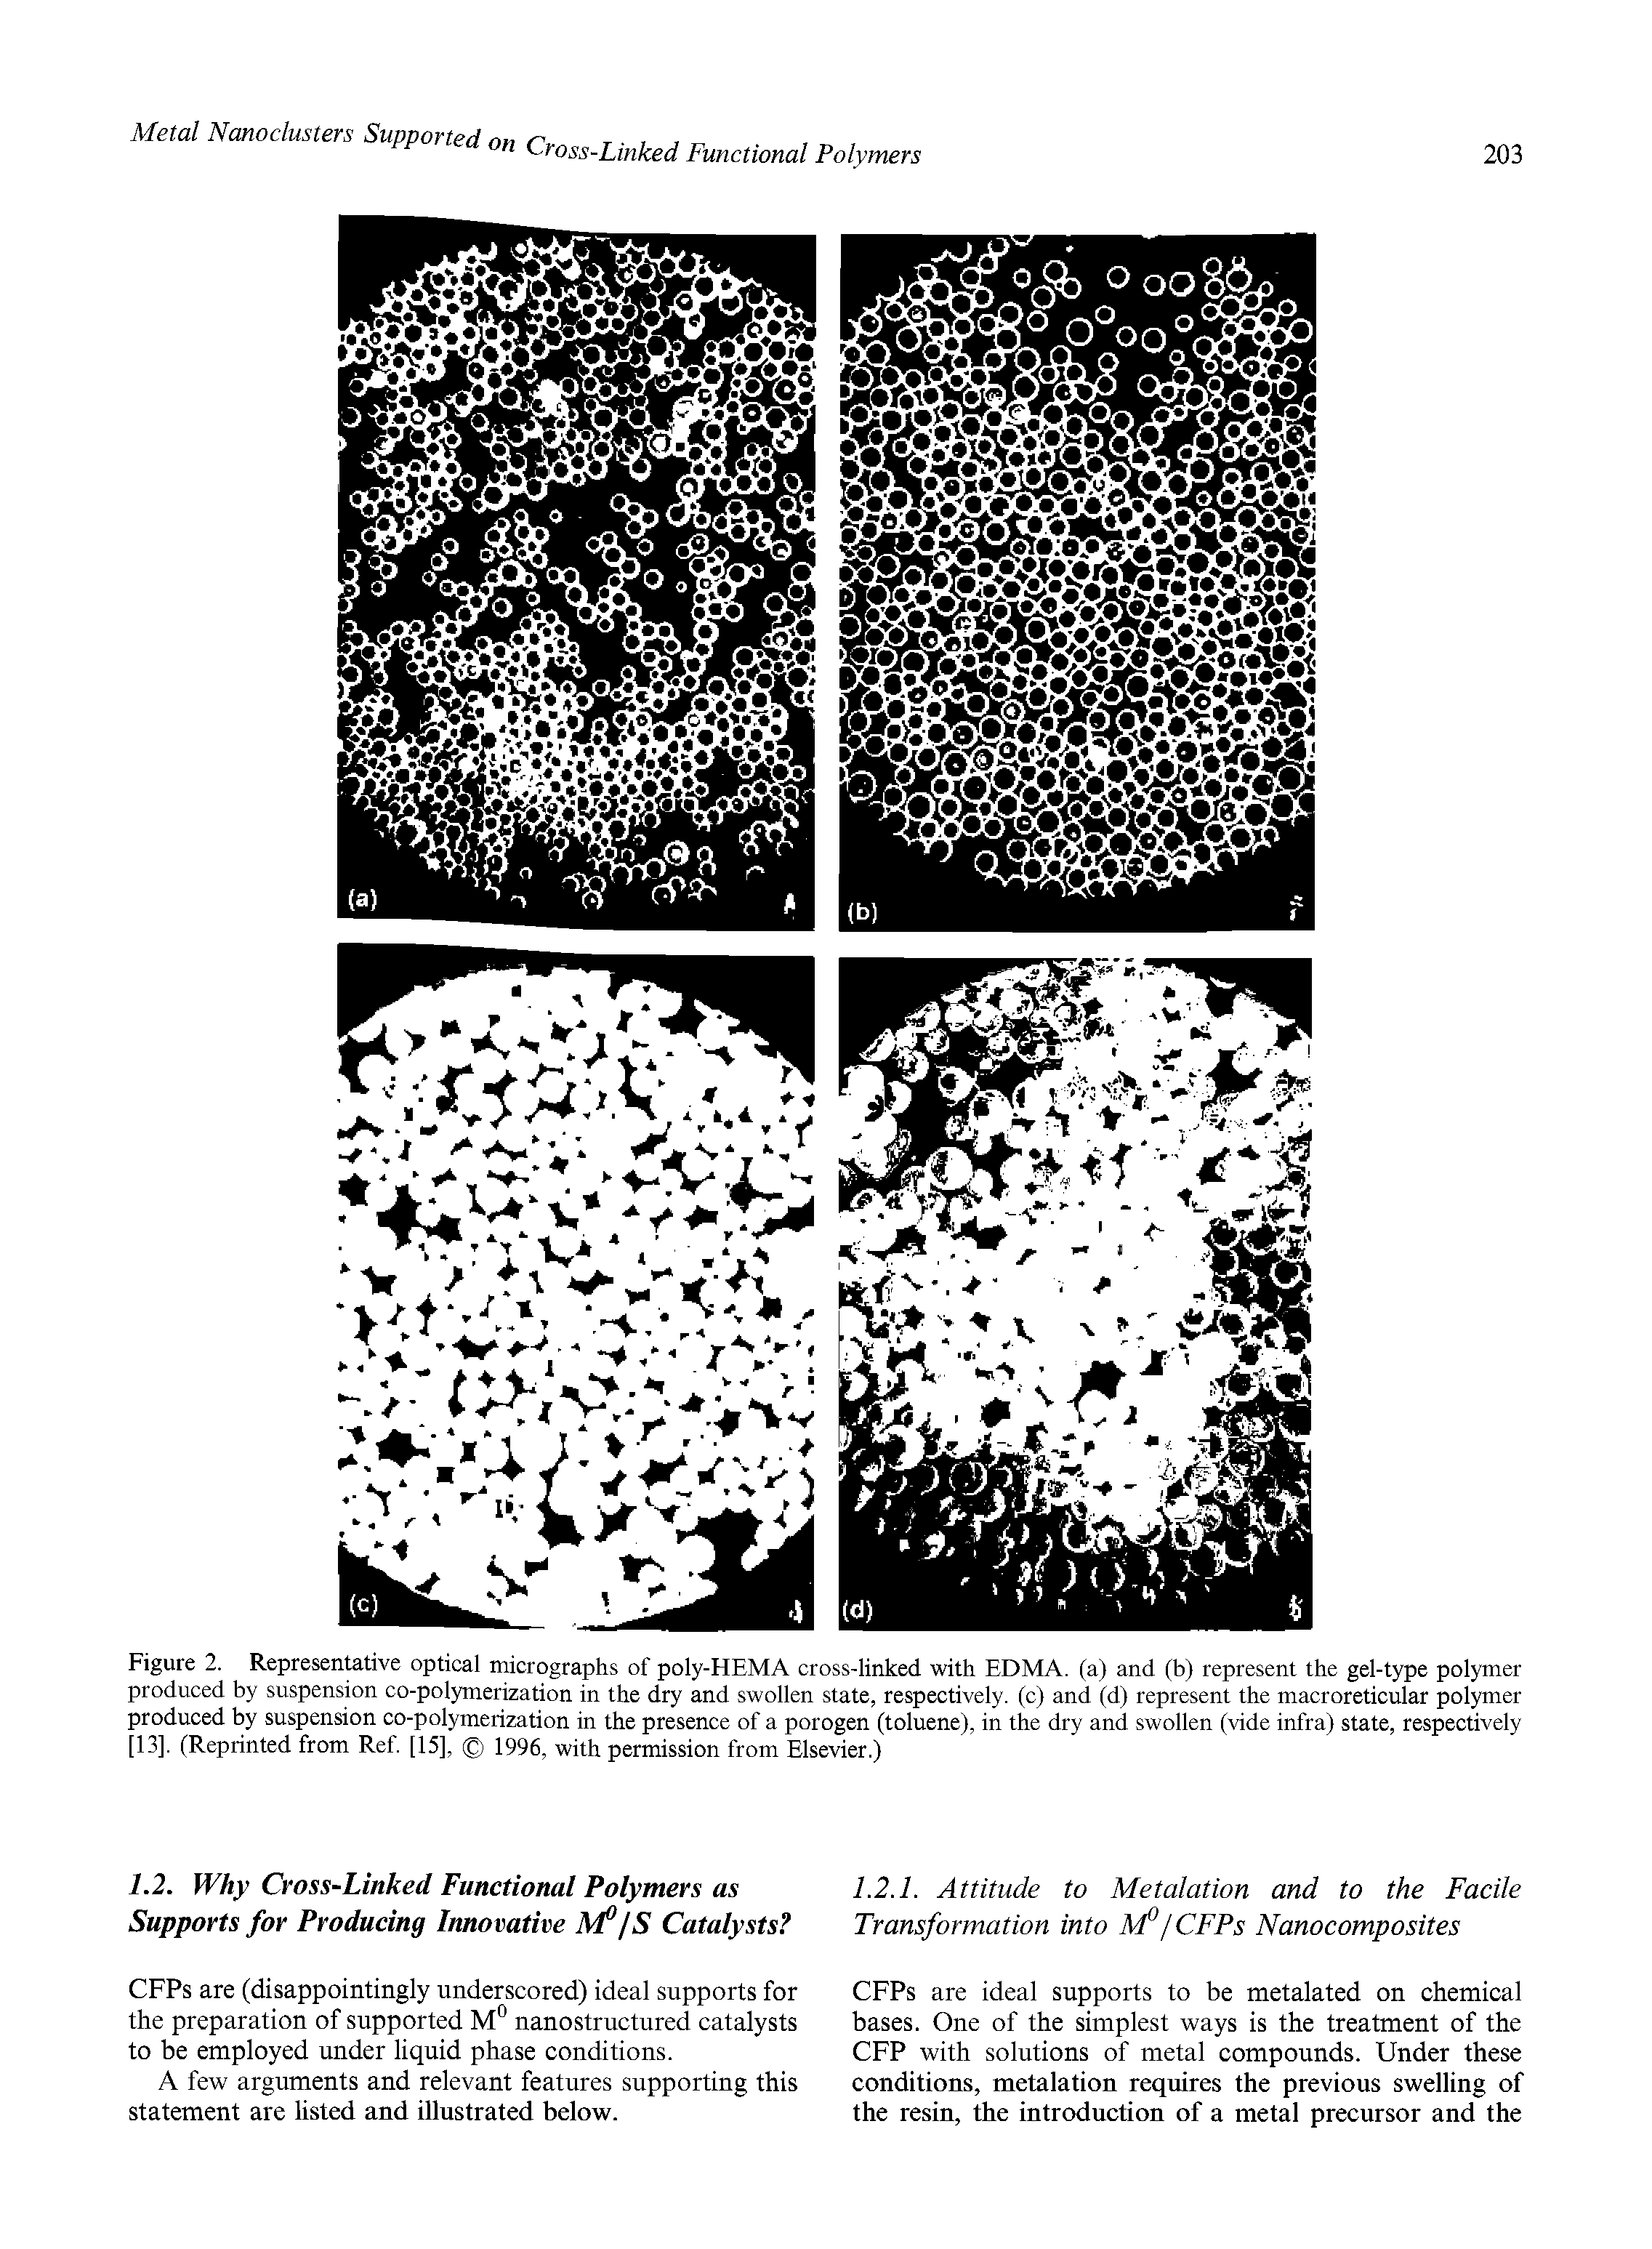 Figure 2. Representative optical micrographs of poly-HEMA cross-linked with EDMA. (a) and (b) represent the gel-type polymer produced by suspension co-polymerization in the dry and swollen state, respectively, (c) and (d) represent the macroreticular polymer produced by suspension co-polymerization in the presence of a porogen (toluene), in the dry and swollen (vide infra) state, respeetively [13], (Reprinted from Ref [15], 1996, with permission from Elsevier.)...